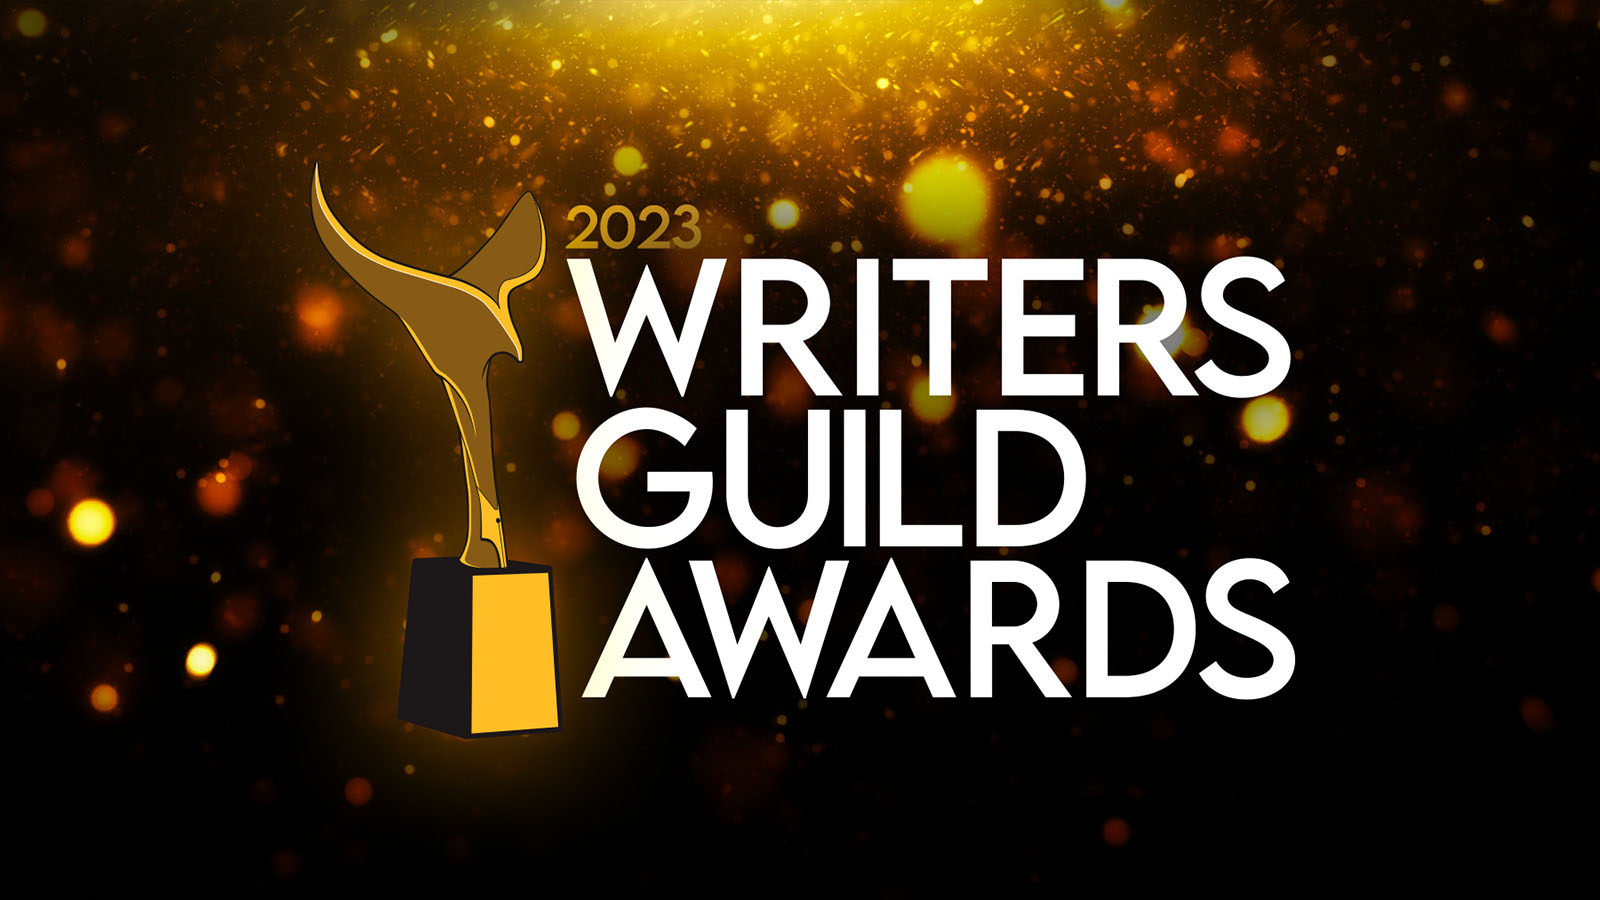 2023 Writers Guild Awards